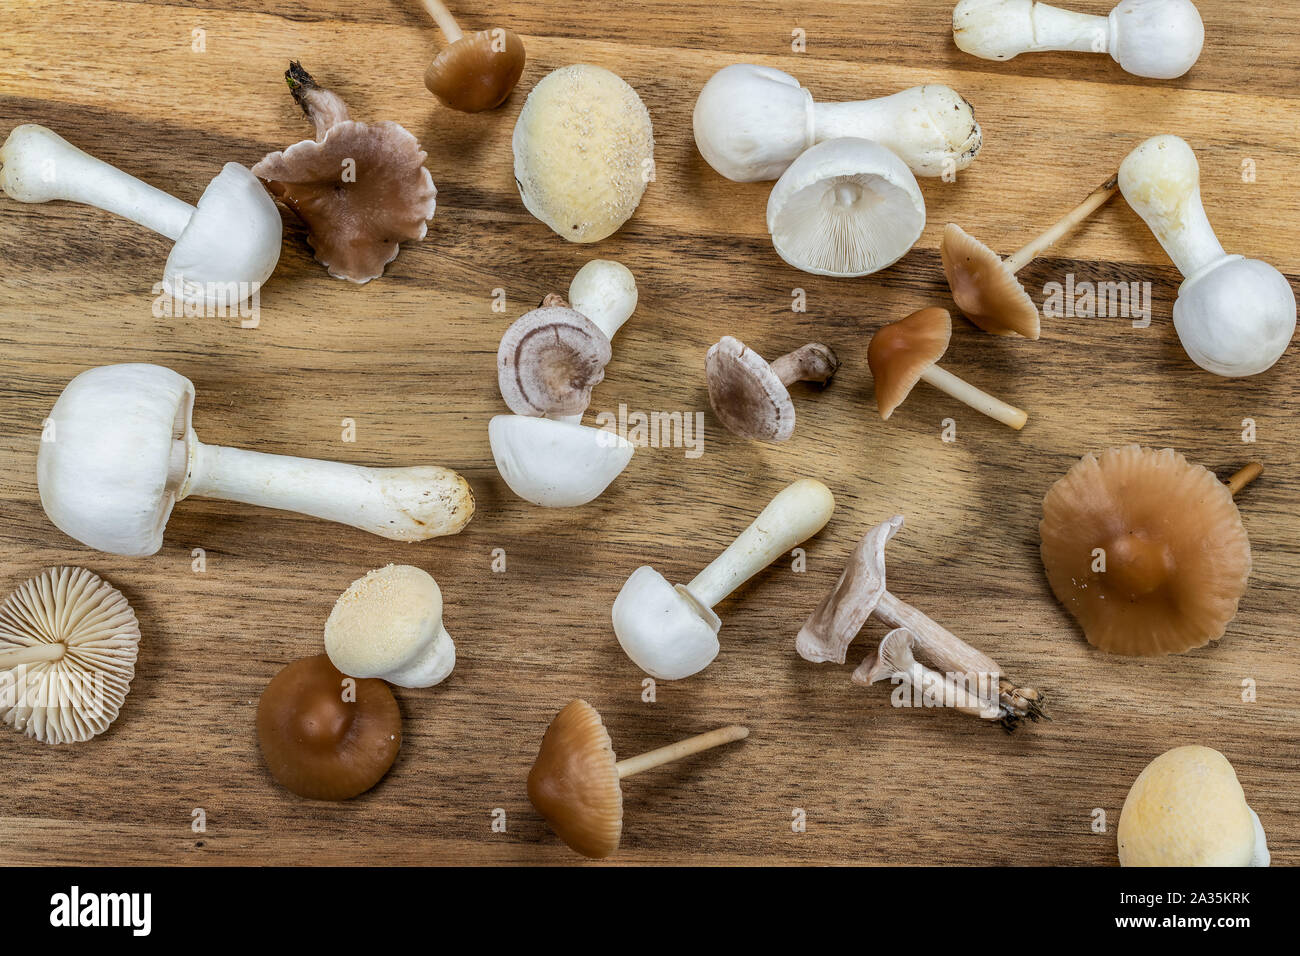 Fresh mushrooms on a wooden chopping board. Overhead view. Stock Photo